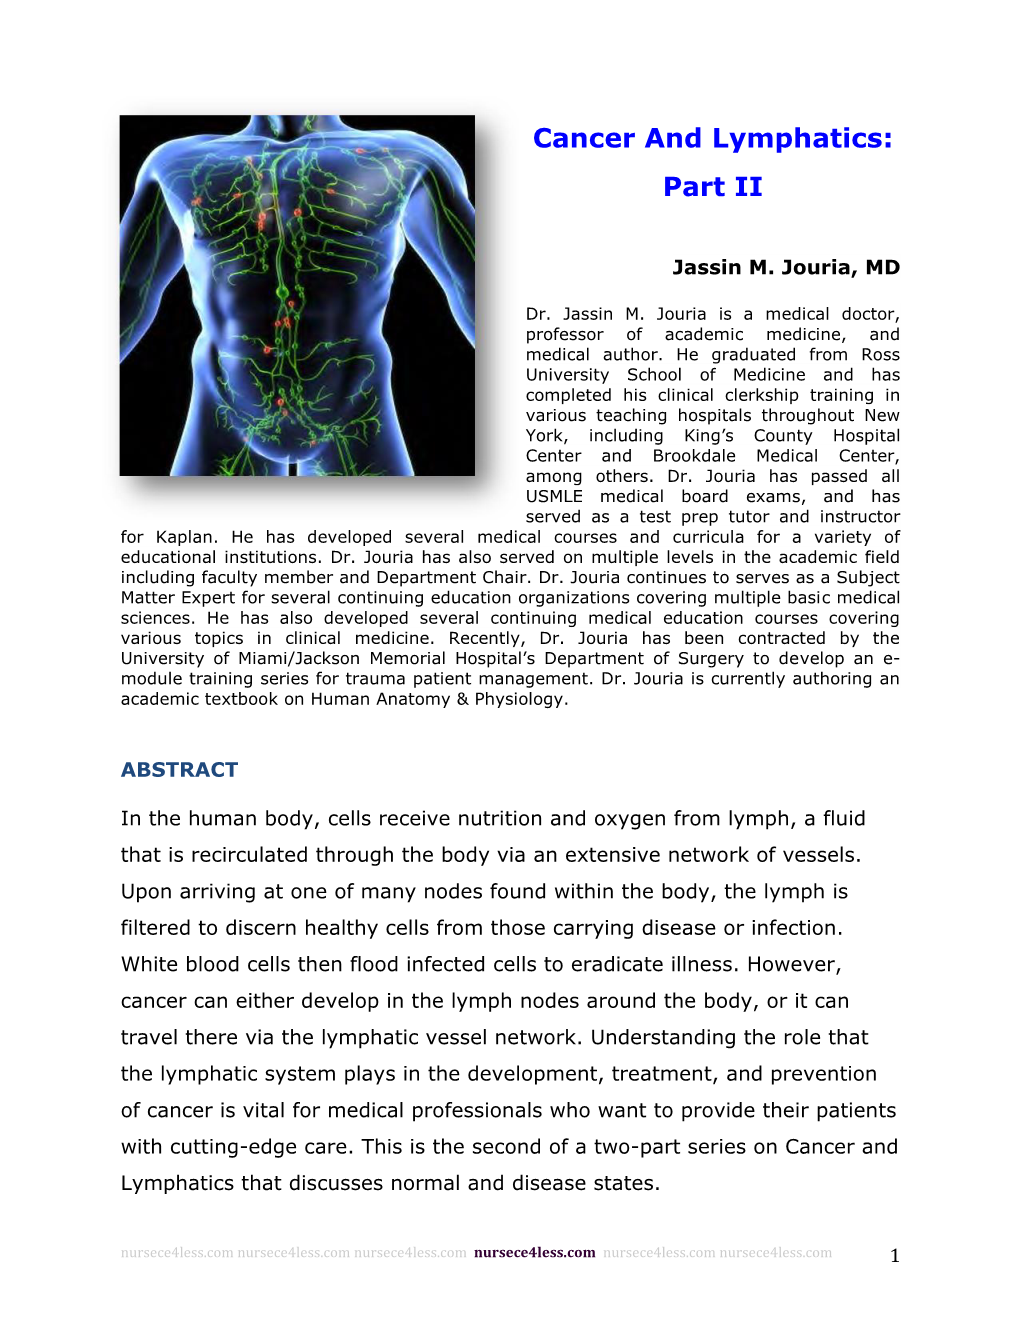 Cancer and Lymphatics: Part II